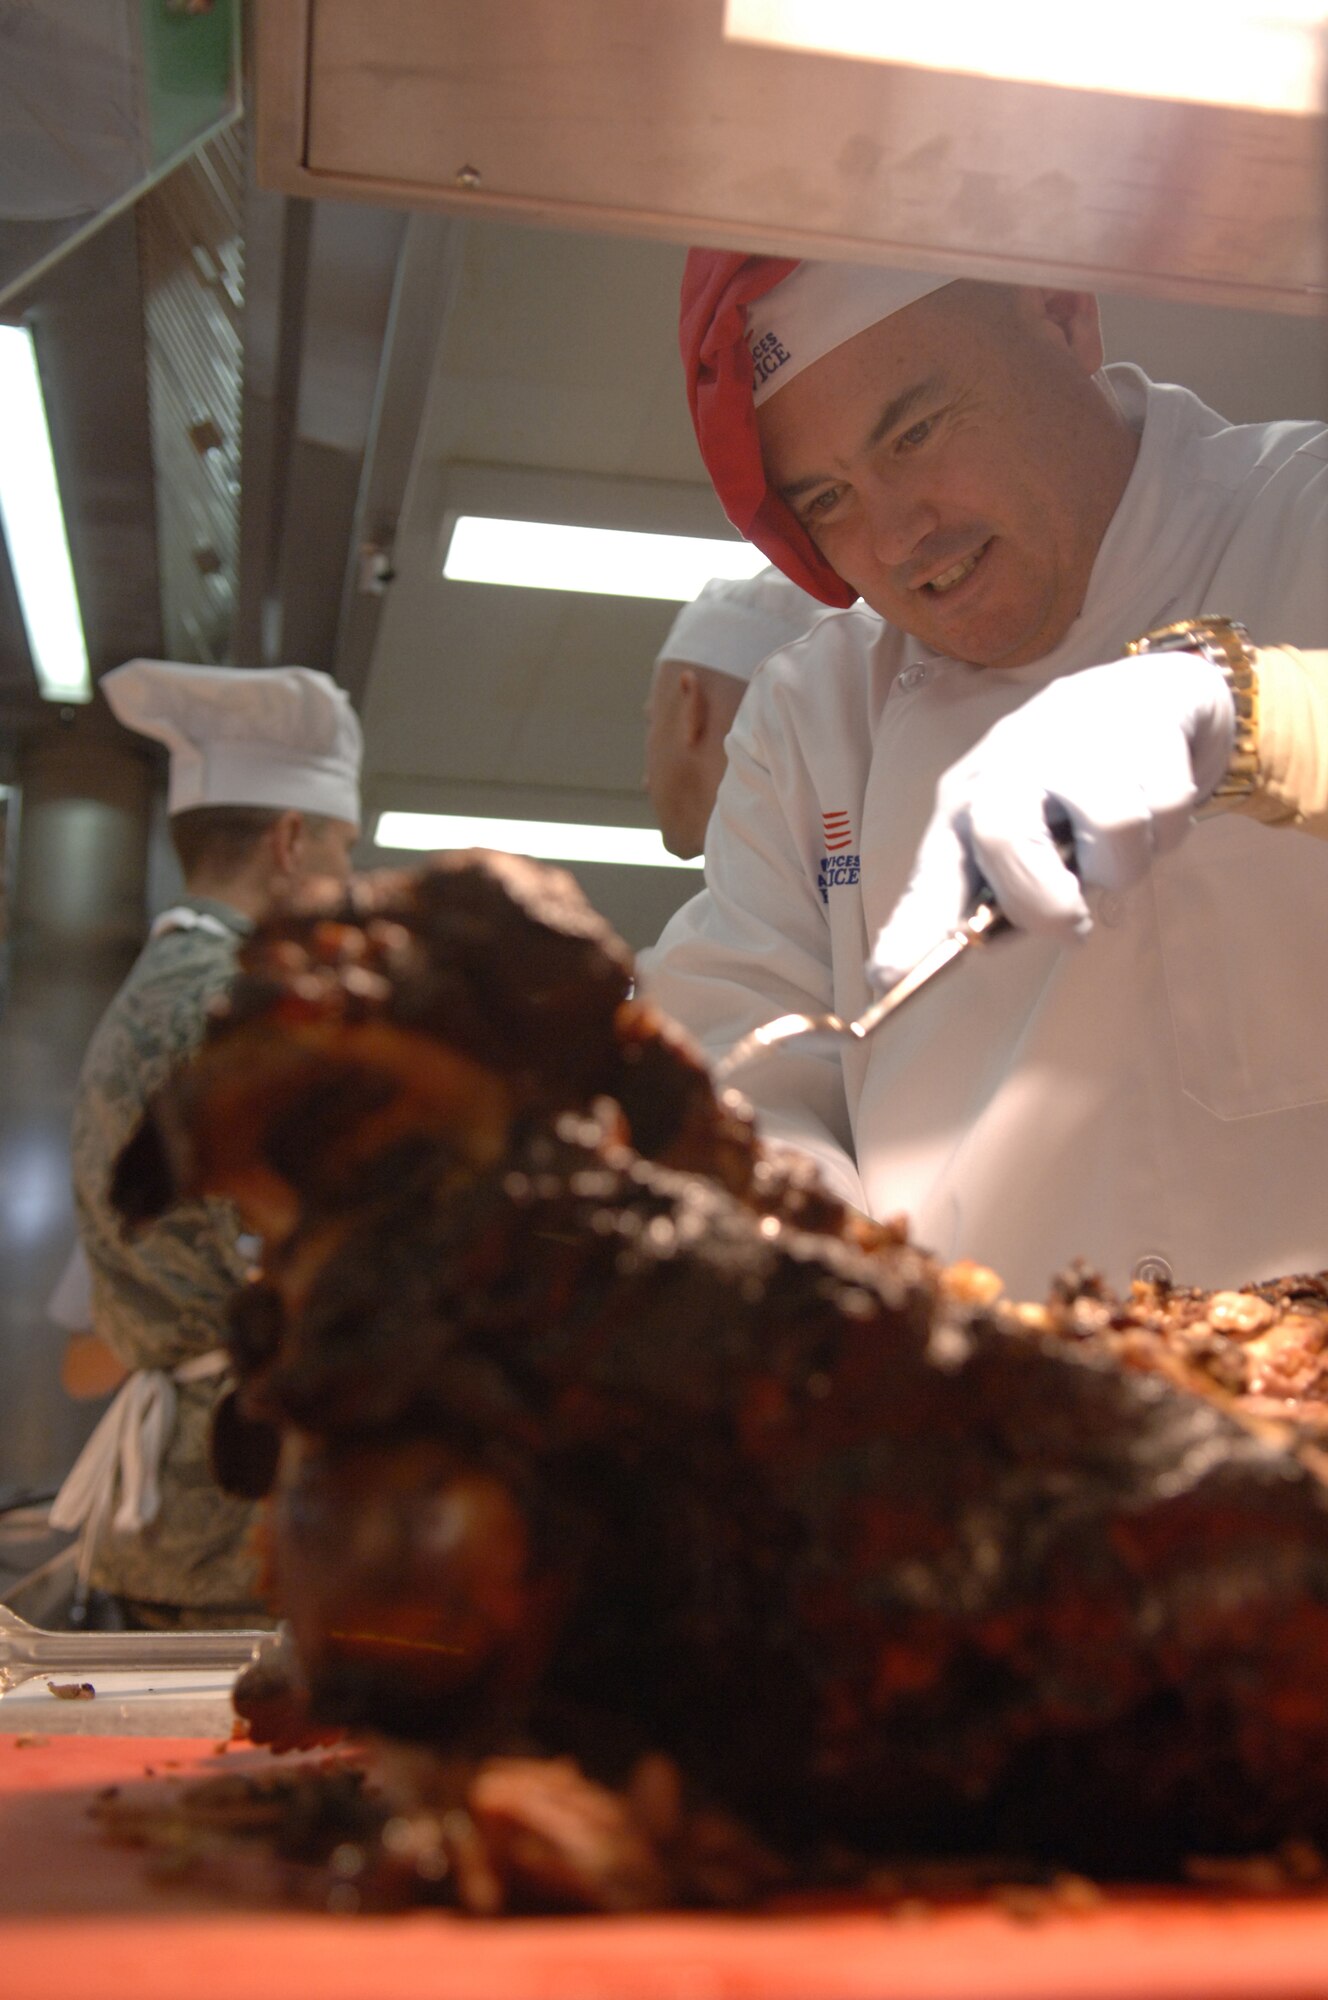 Col. Gus Green (right), 435th Air Base Wing vice commander, carves a roast during Thanksgiving meal to patrons of the Lindberg Hof Dining Facility, Kapaun Air Station, Germany, Nov. 27, 2008. (U.S. Air Force photo by Senior Airman Levi Riendeau)